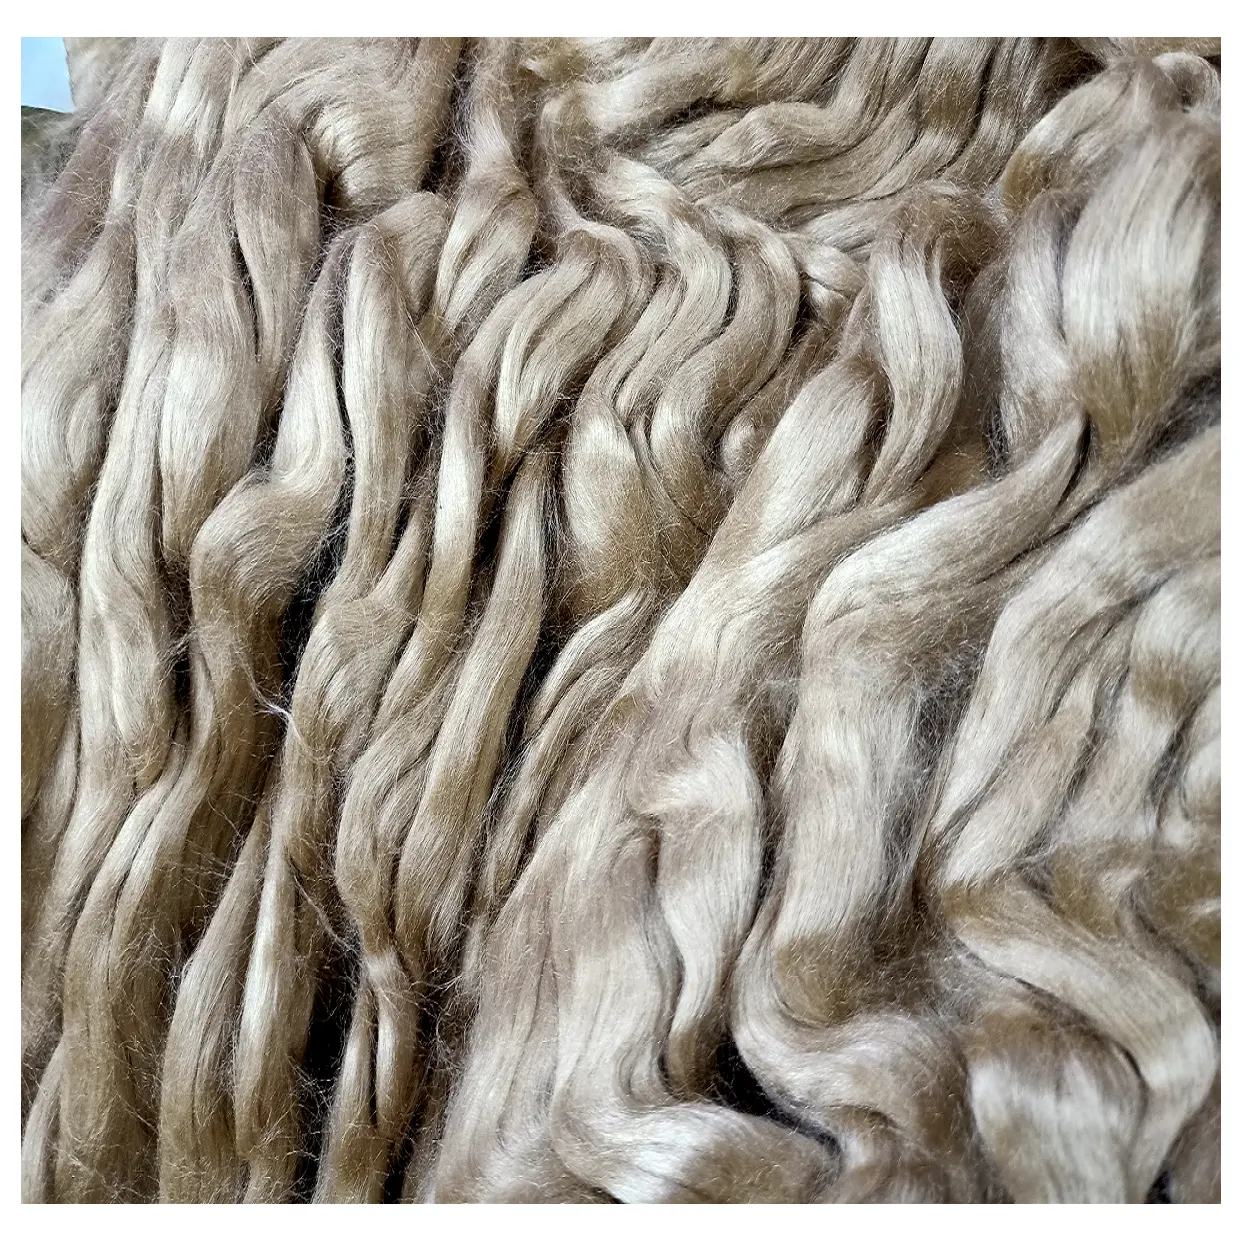 naturally golden muga silk sliver and tops suitable for yarn and fiber store